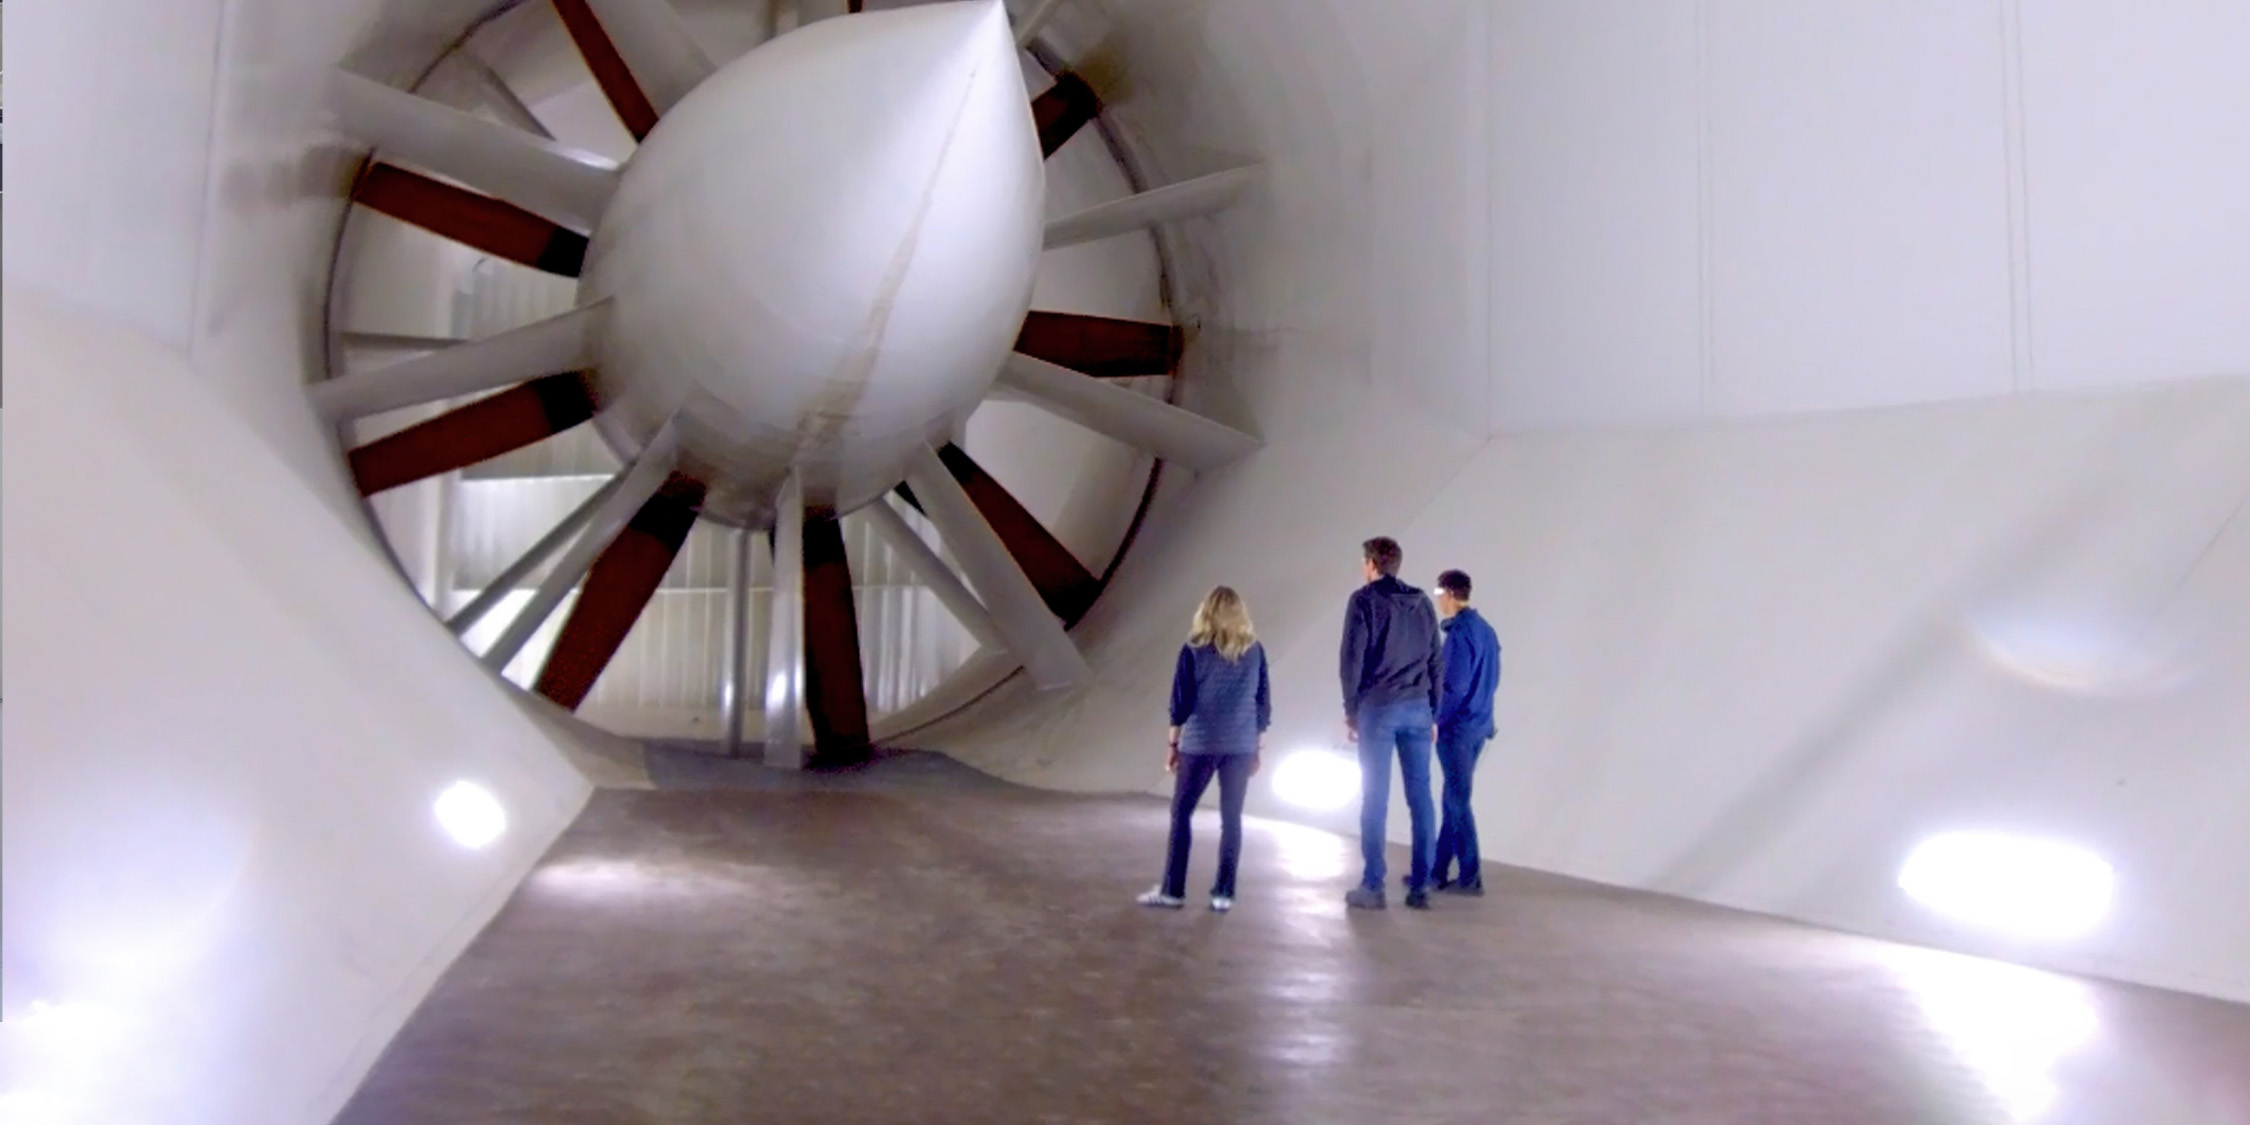 Getting Ready to Propel: Check out Wisk’s Wind Tunnel Test